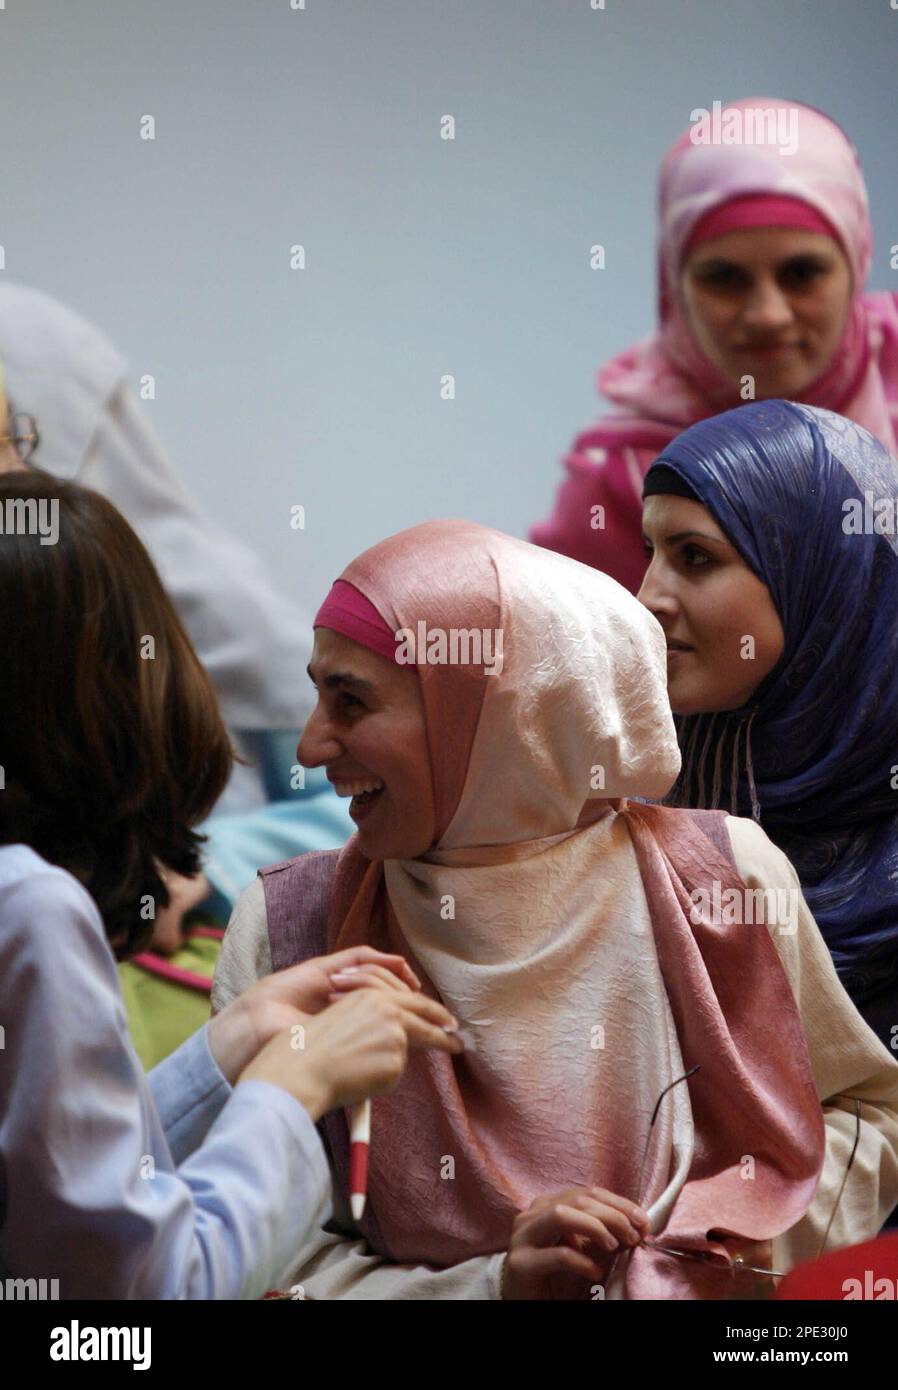 Kosovo Albanian women chat during a fashion show for Islamic female clothing, Thursday June 23, 2005, in Pristina